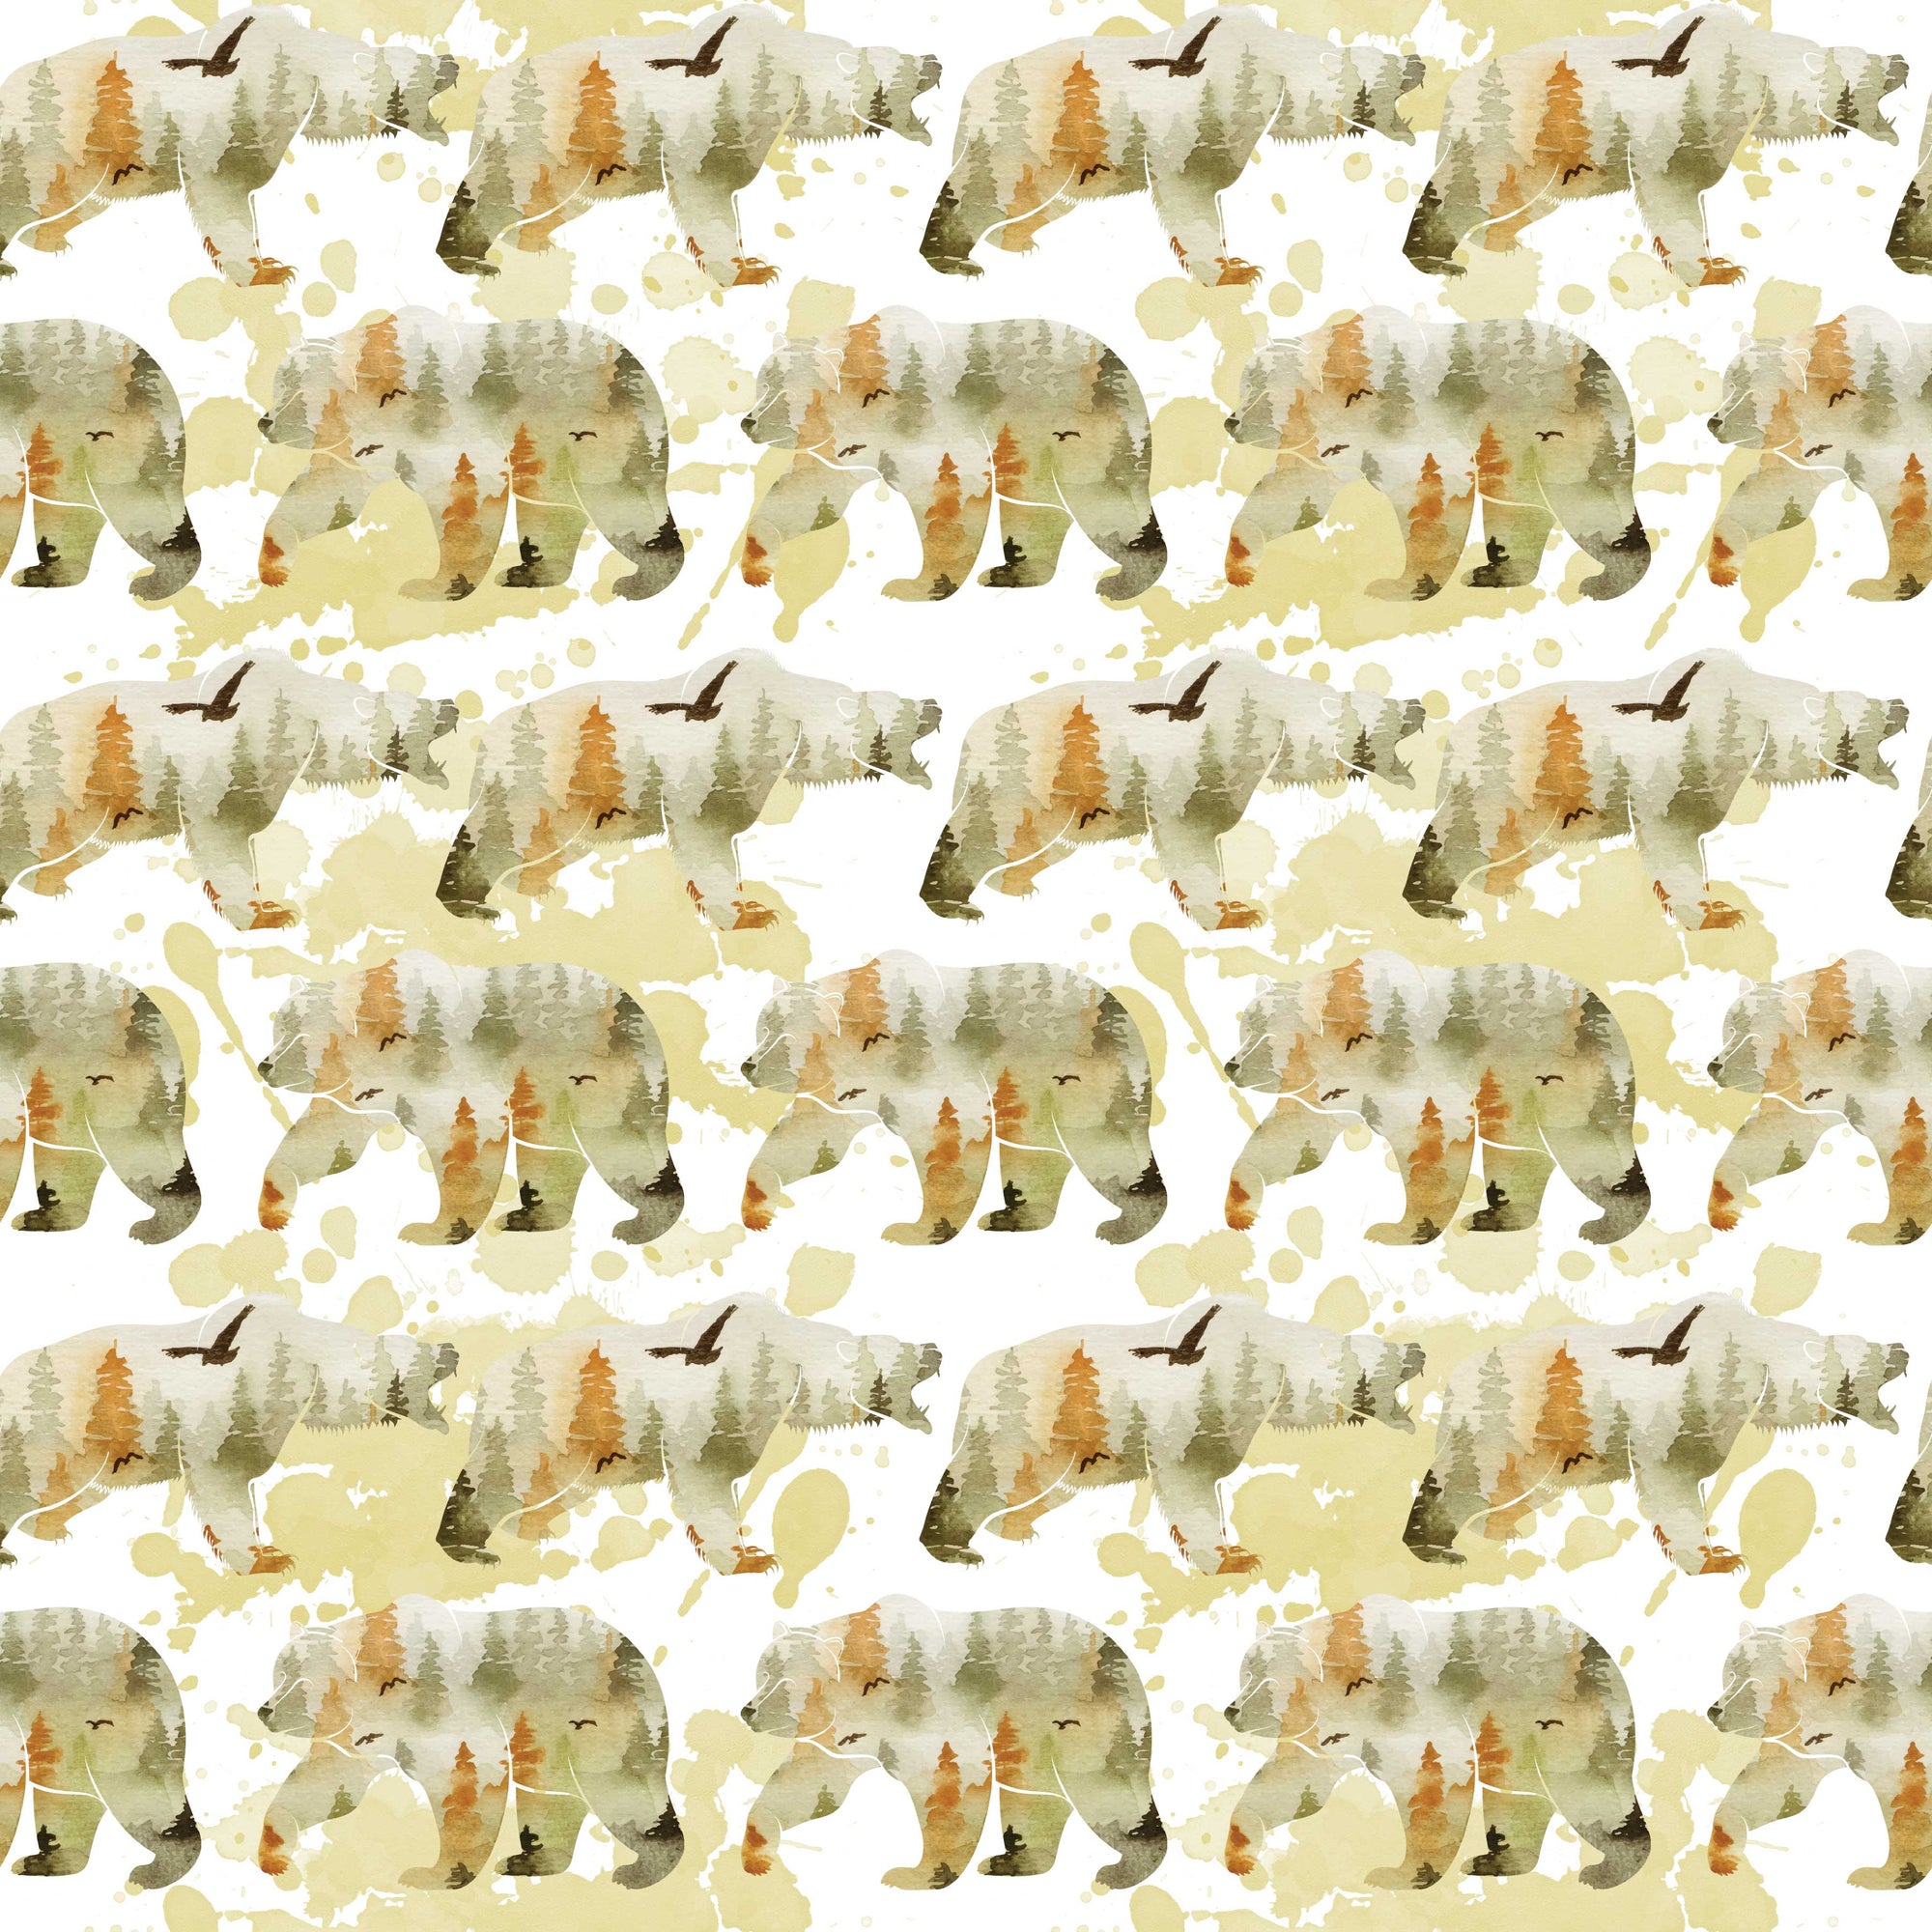 Bears Wandering - Wrapping Paper